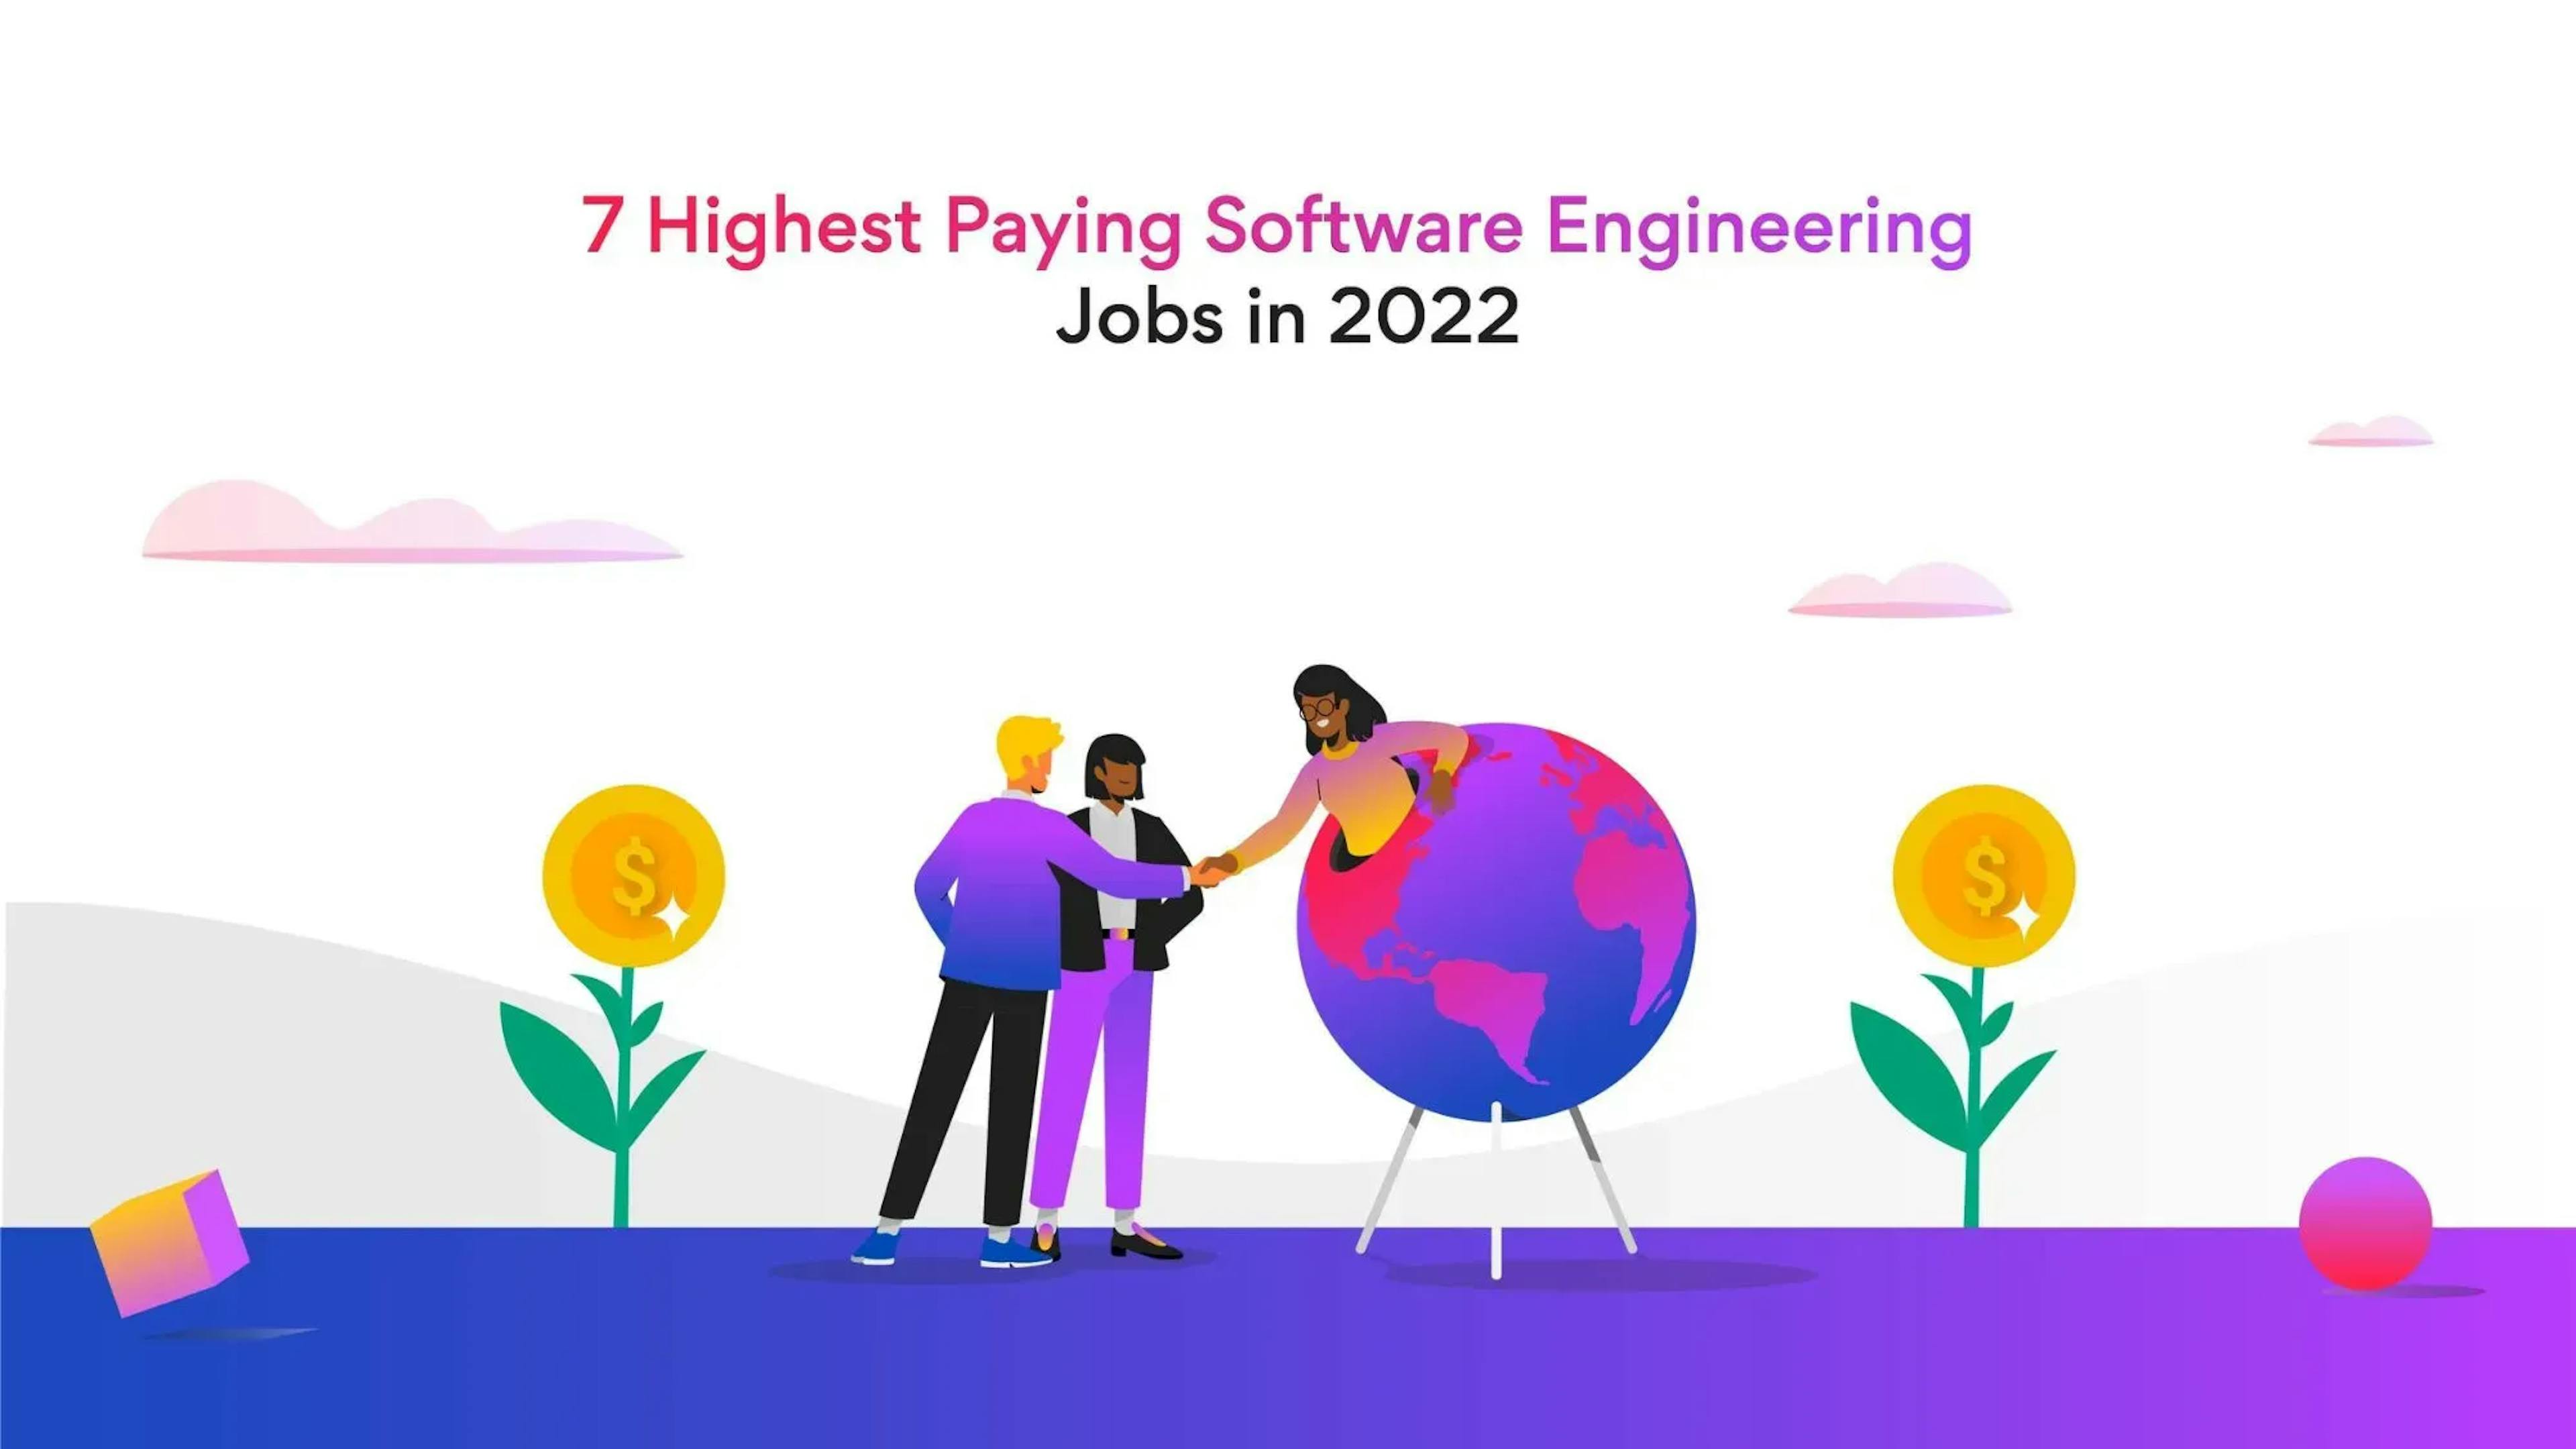 These Are the Highest Paying Software Engineering Jobs